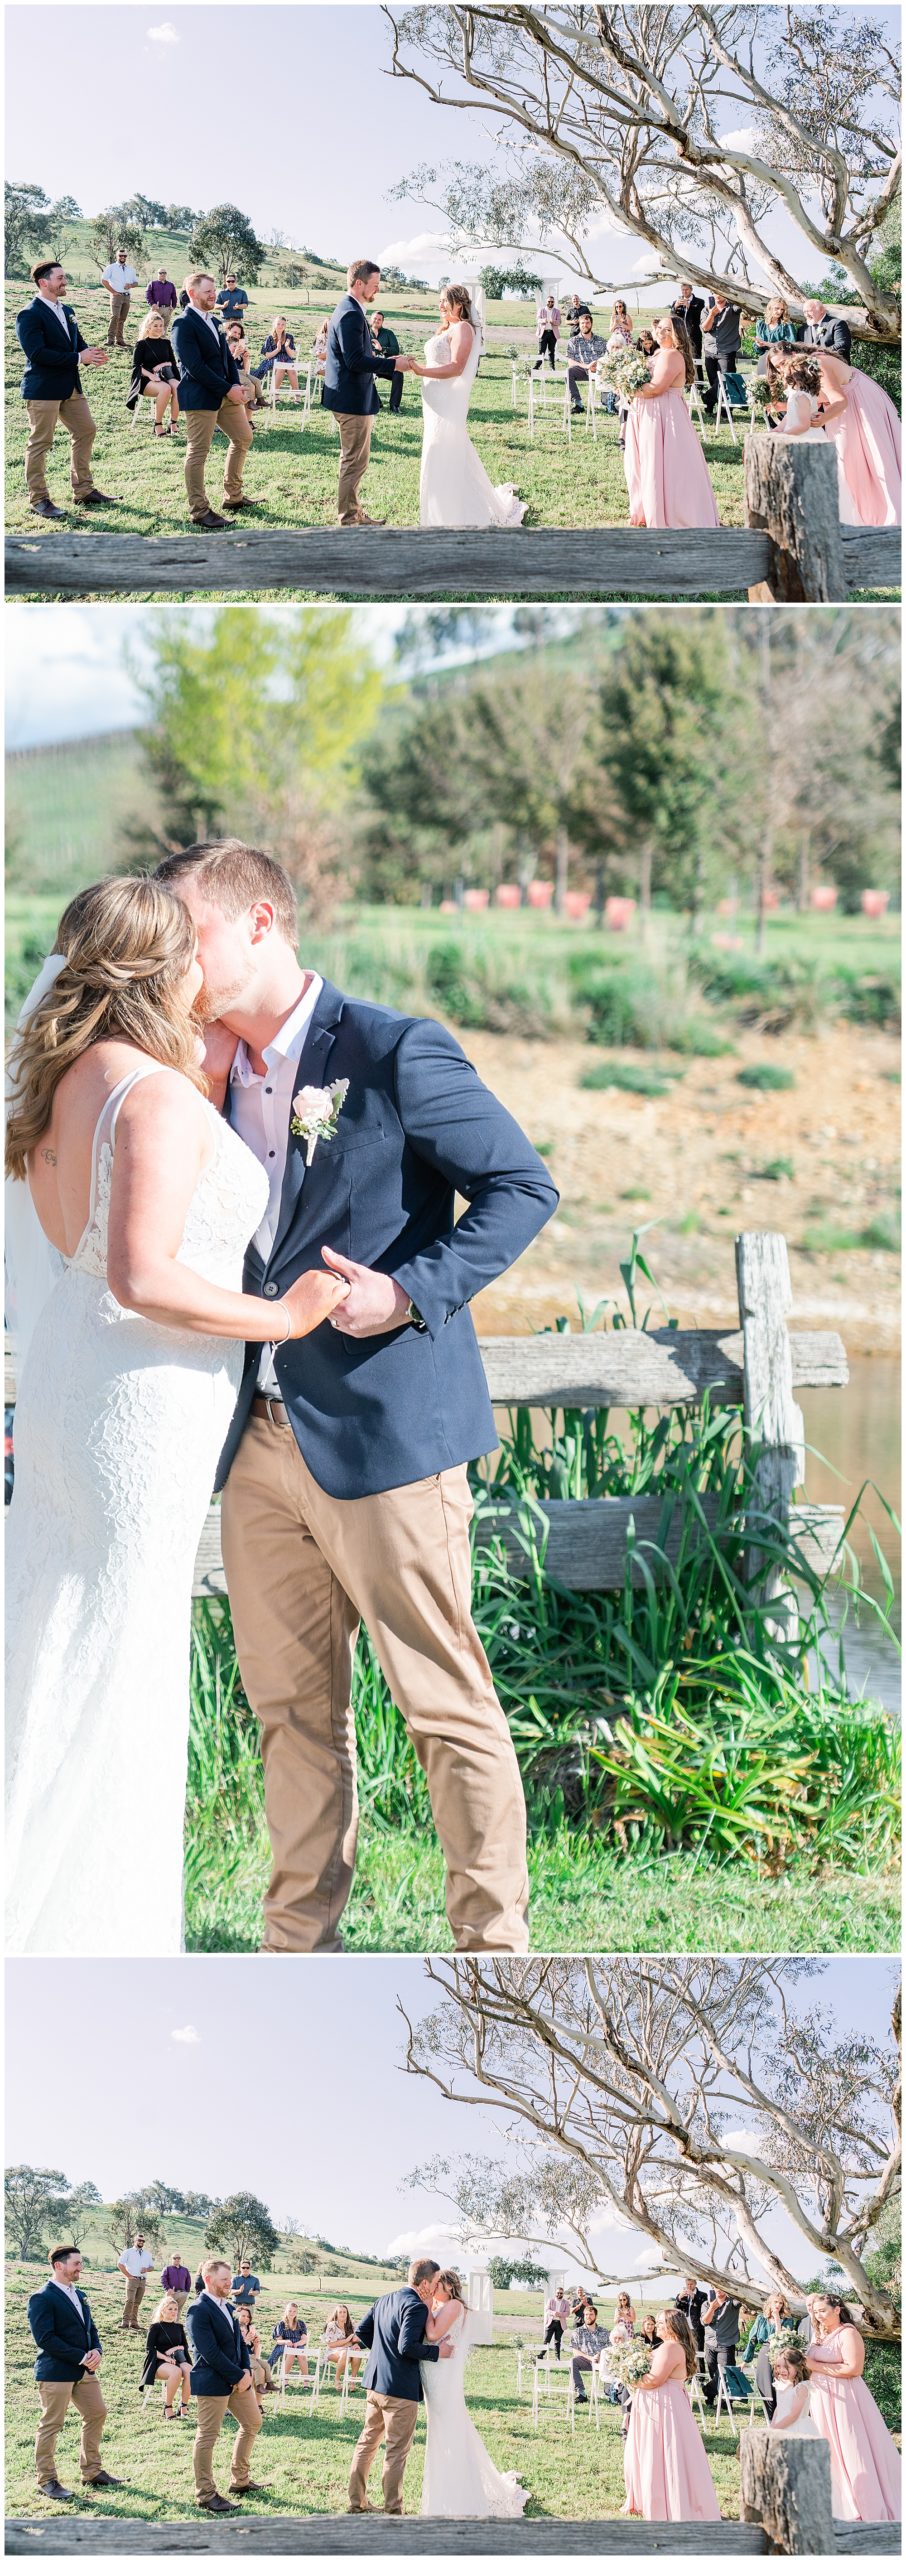 Reversed first kiss at ceremony  